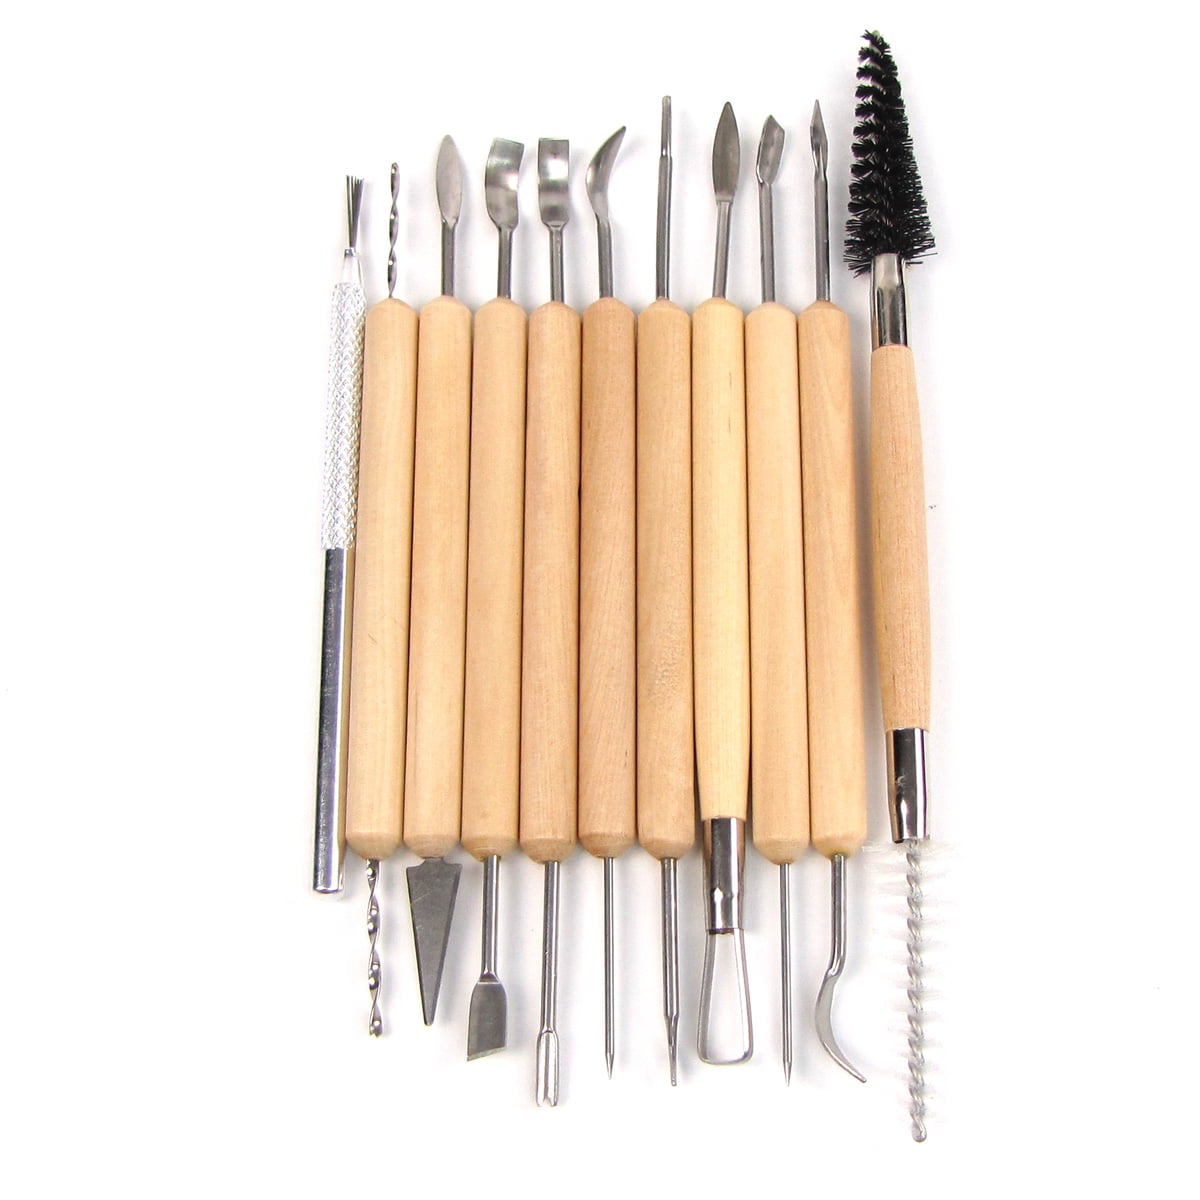 Clay Tools Polymer Sculpting Pottery Set Carving Ceramic Tool Modeling Craft Art 